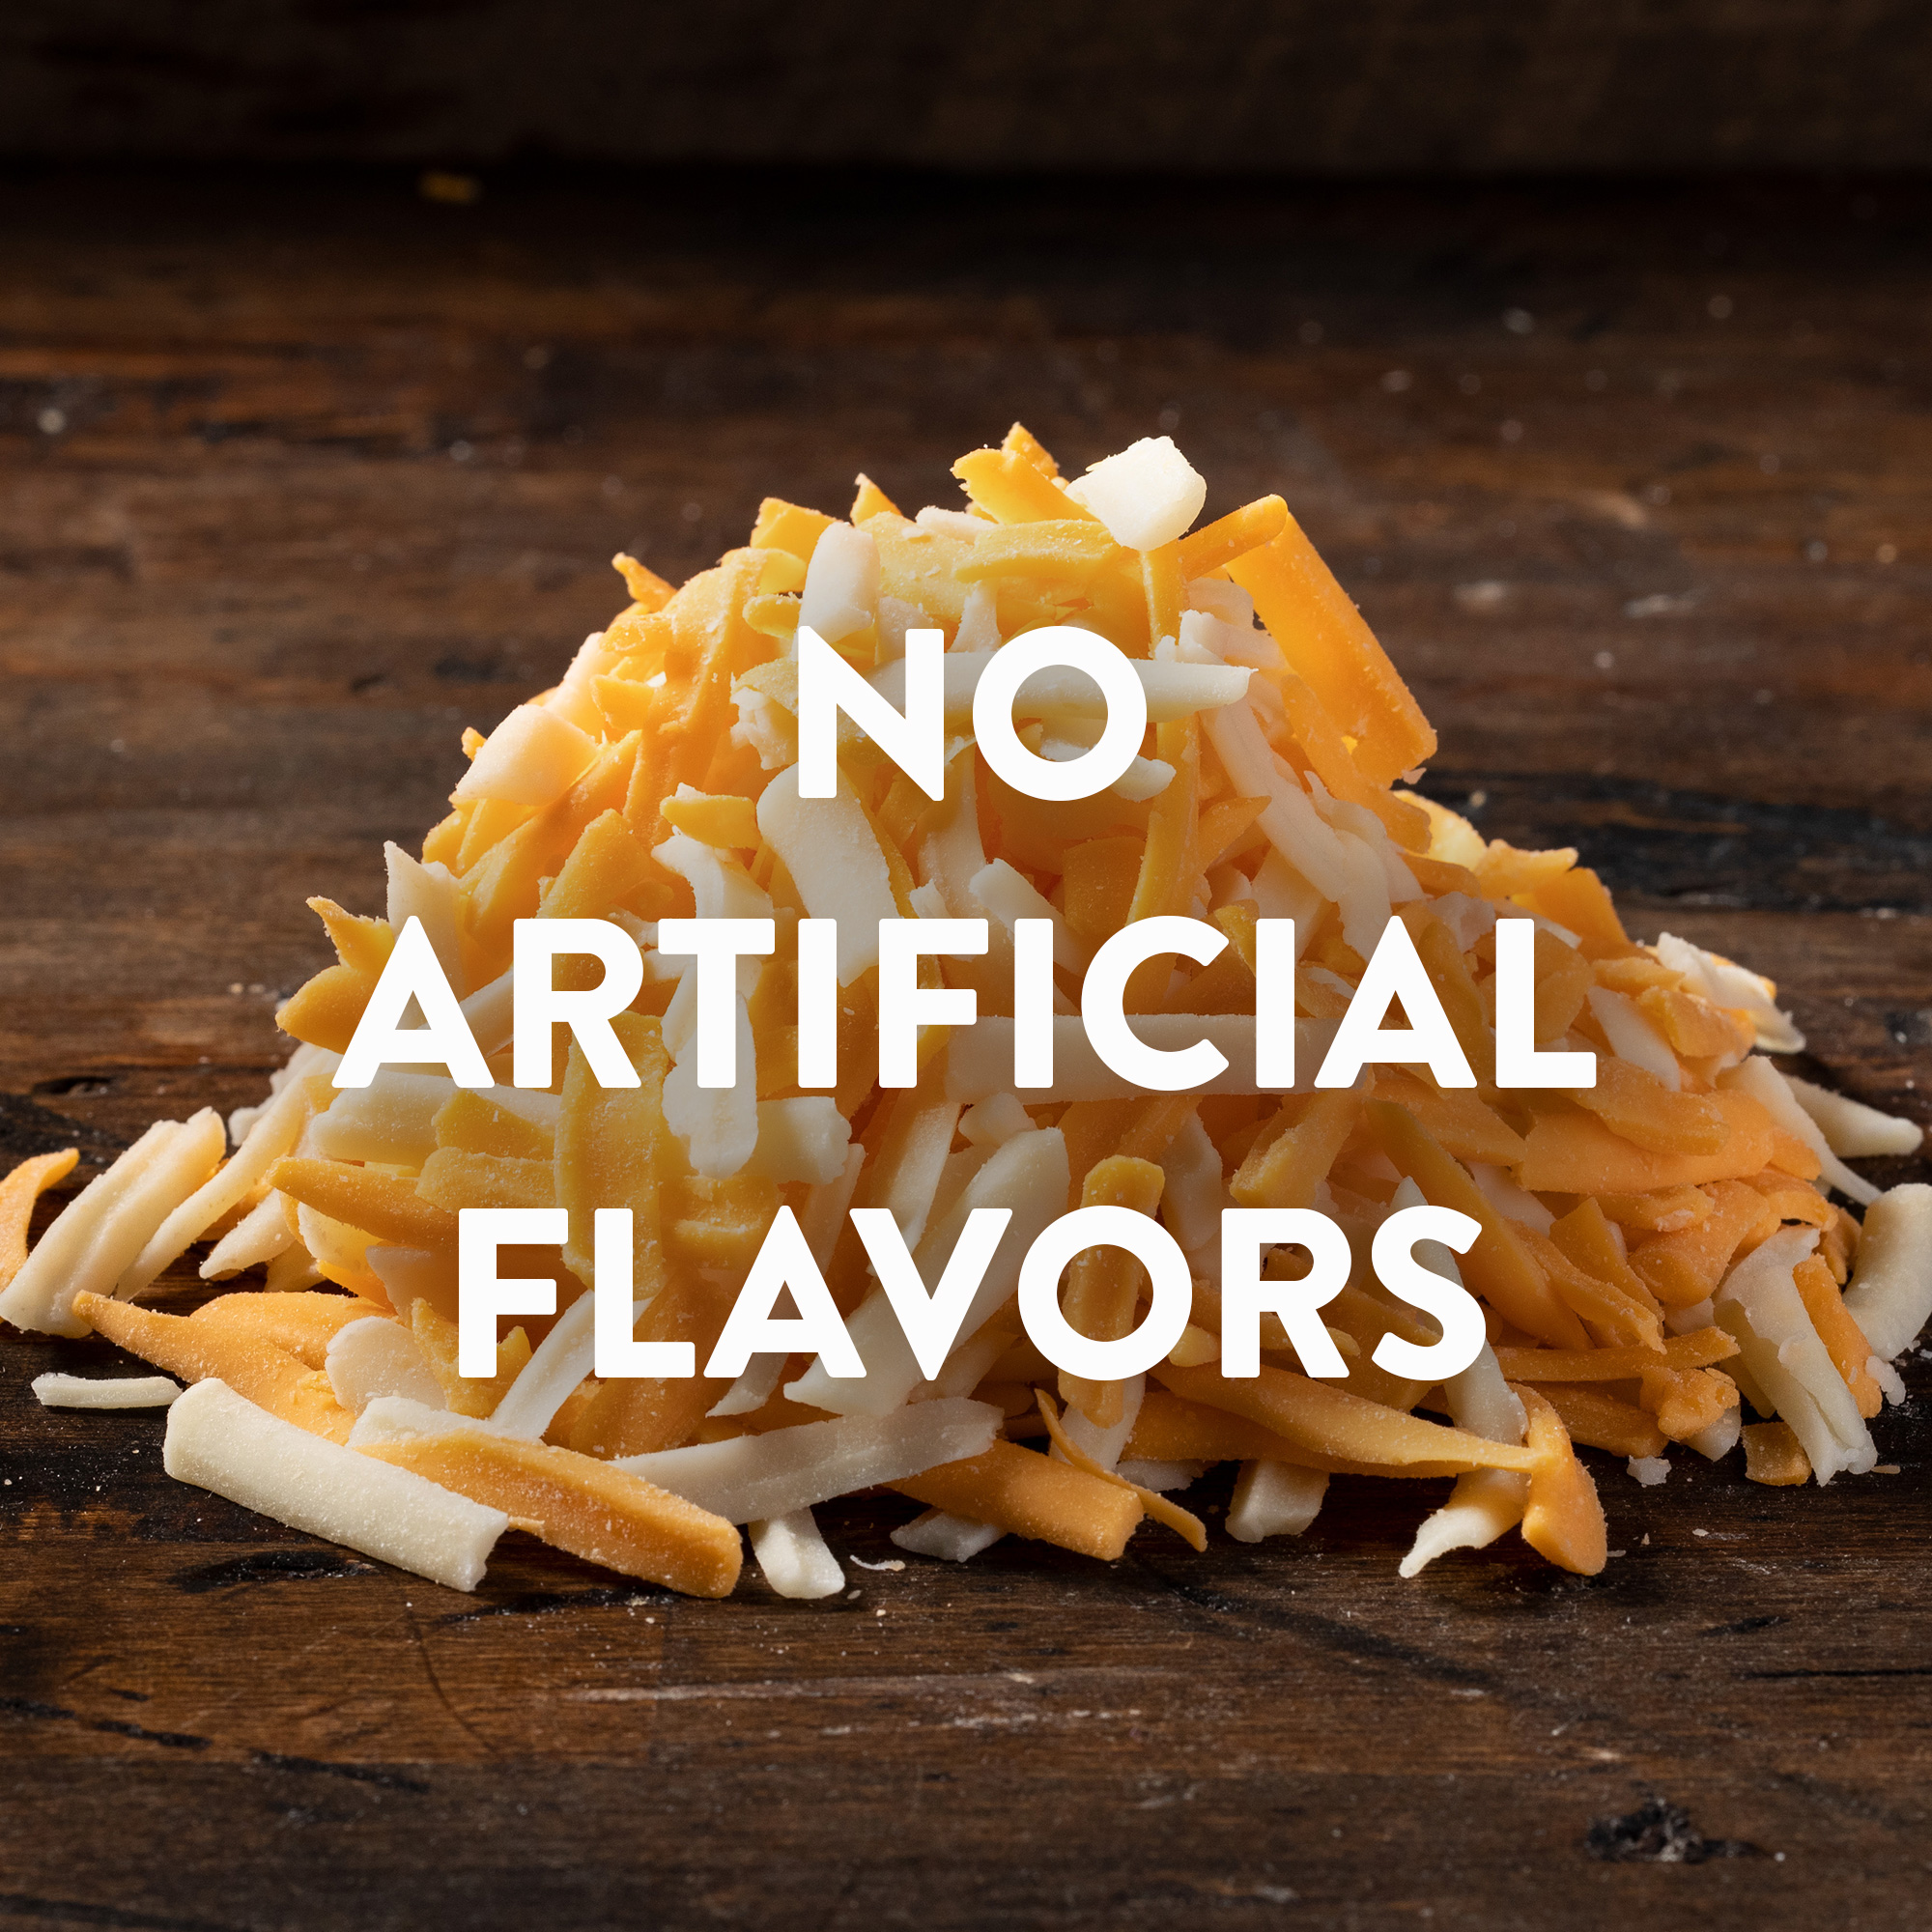 Sargento® Shredded Nacho & Taco Natural Cheese with Authentic Seasonings